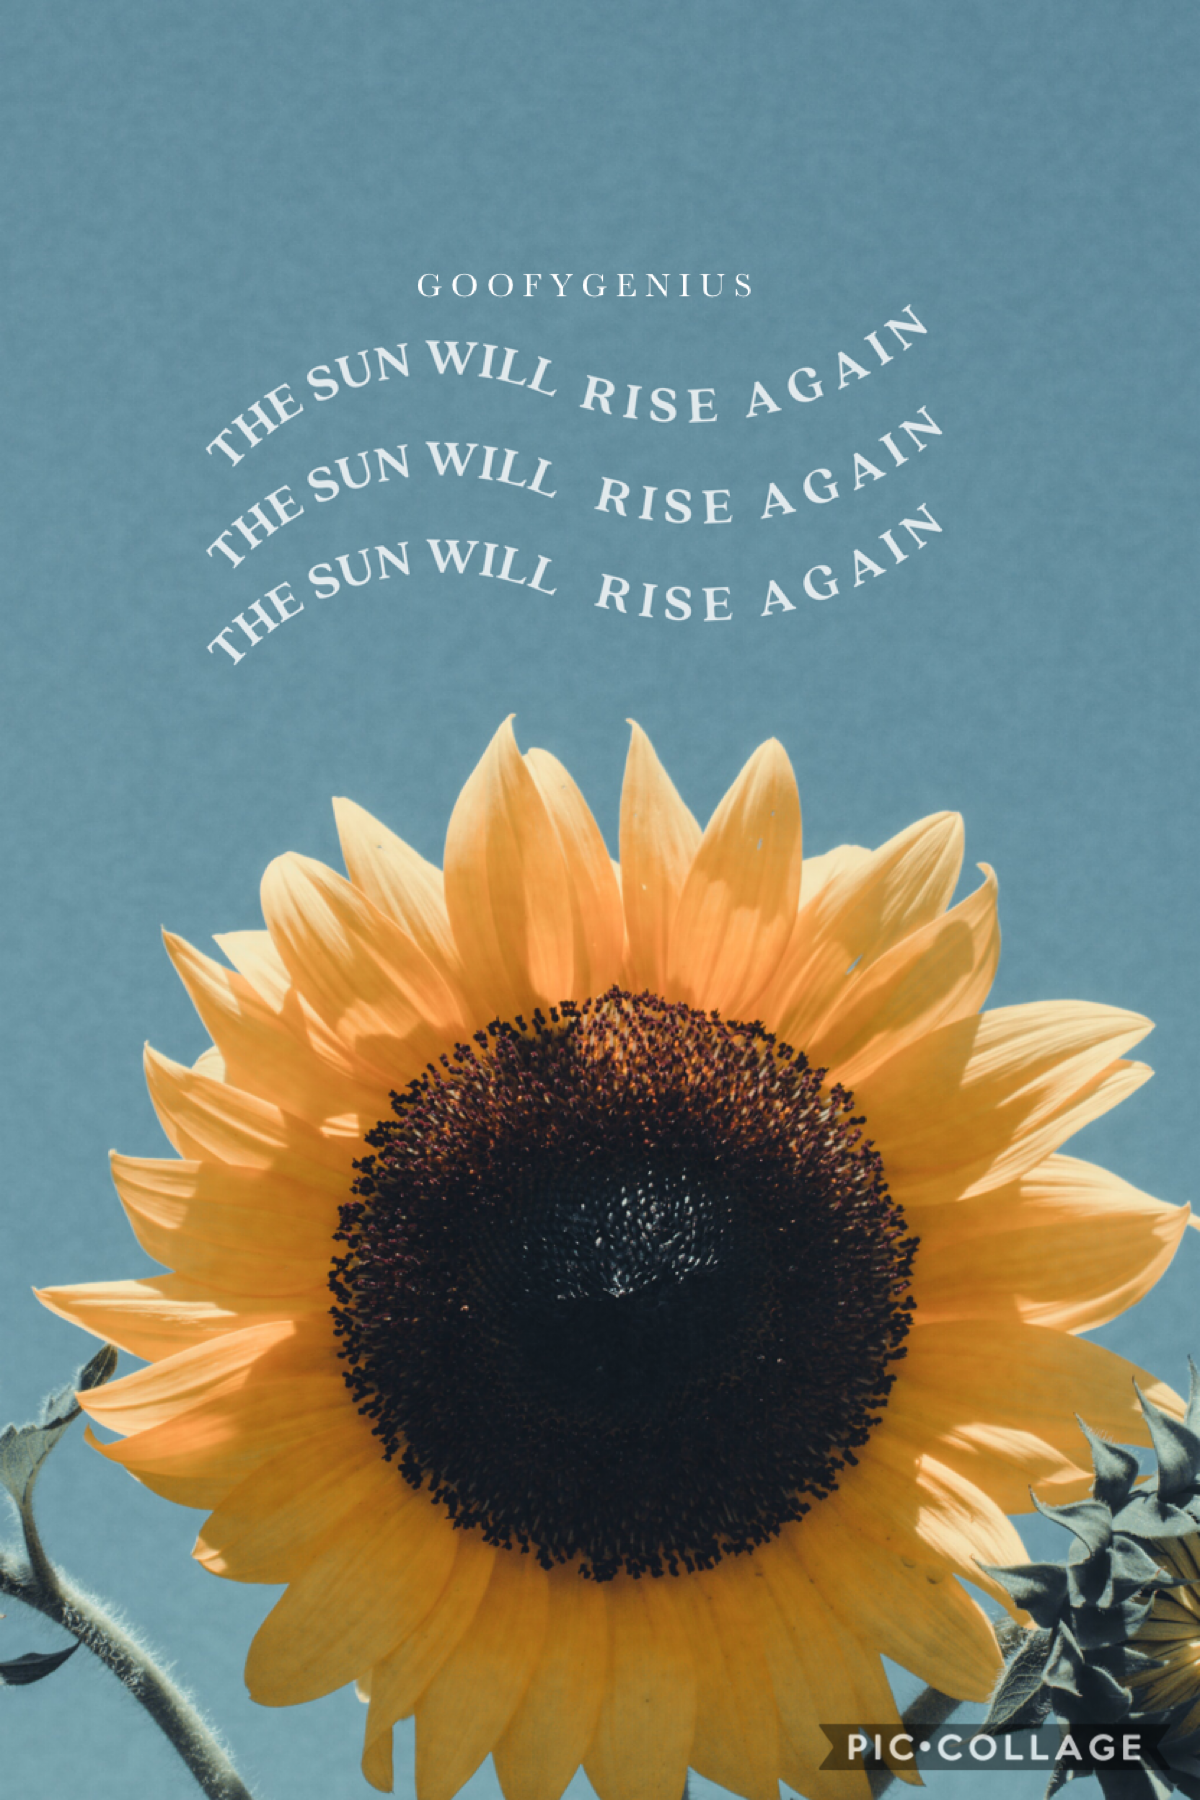 🌻Tap Here🌻
Thank you all for your sweet messages on my last post. You guys don’t know how much that helped. Just a simple wallpaper :) please rate 1-10.
QOTD: in person classes or online next sem?
AOTD: I think online? 